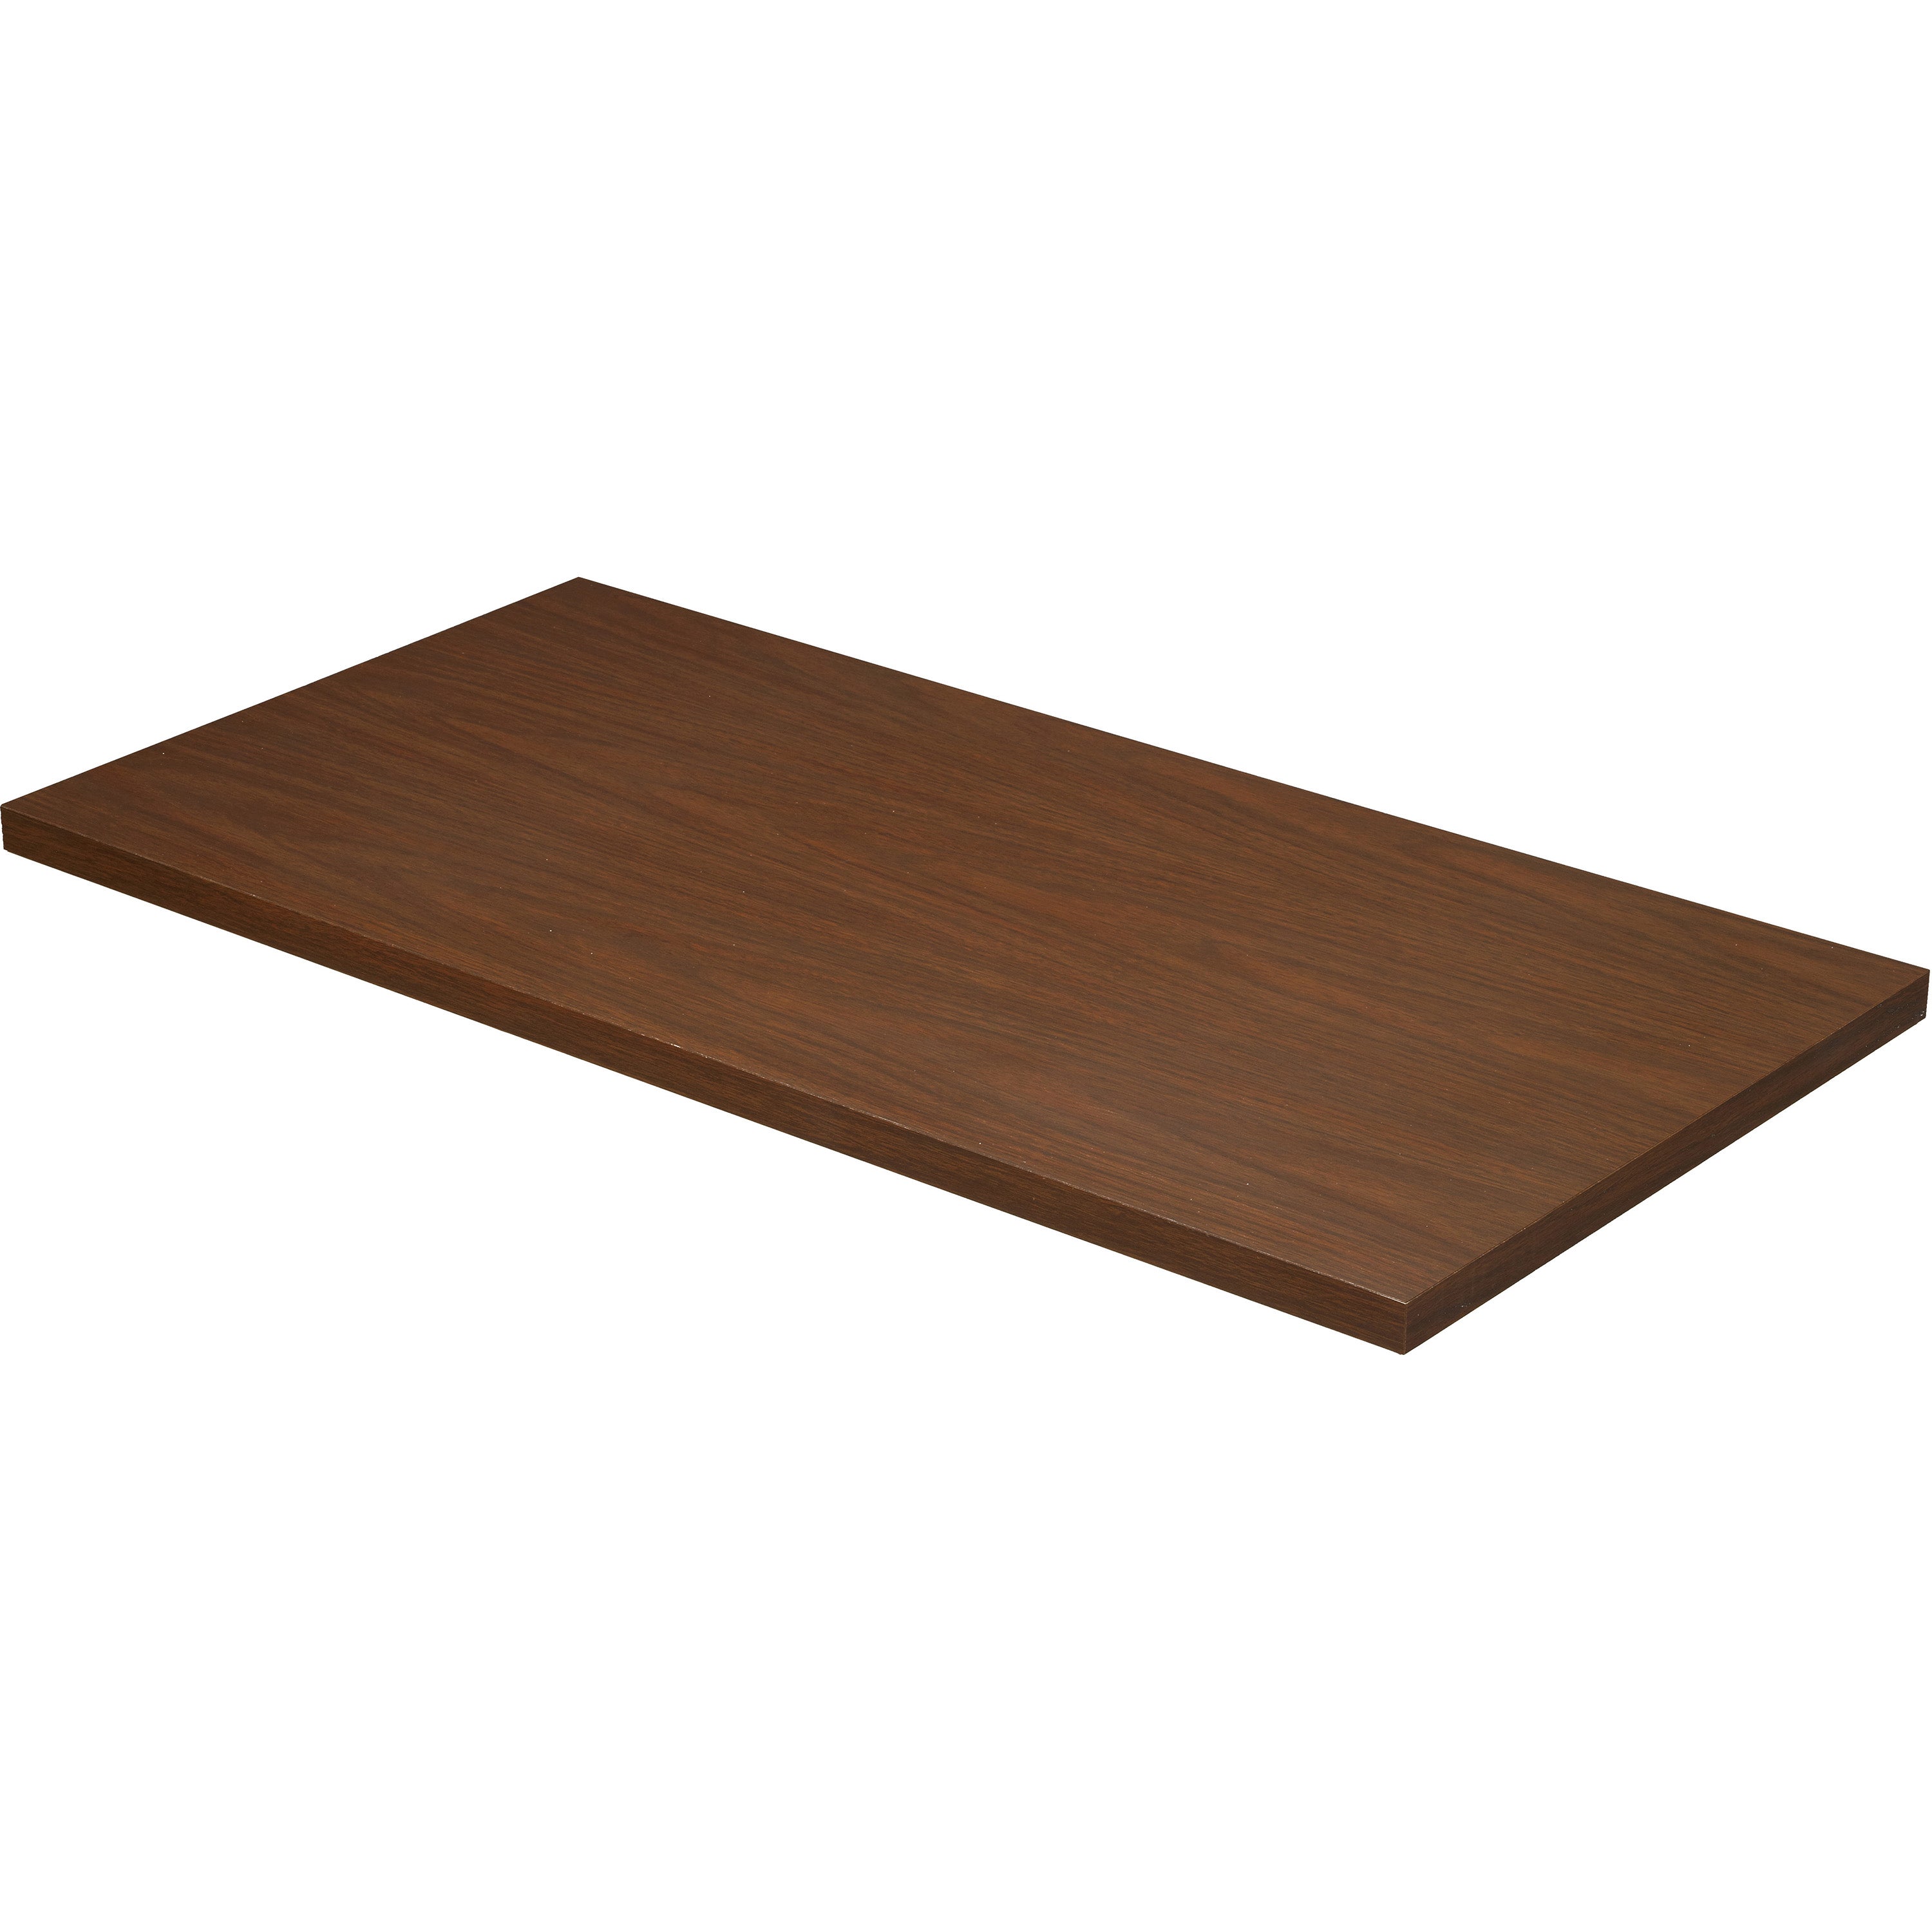 Tennsco 36" Wide Laminate Top for Lateral File - Mahogany, T1836-L005